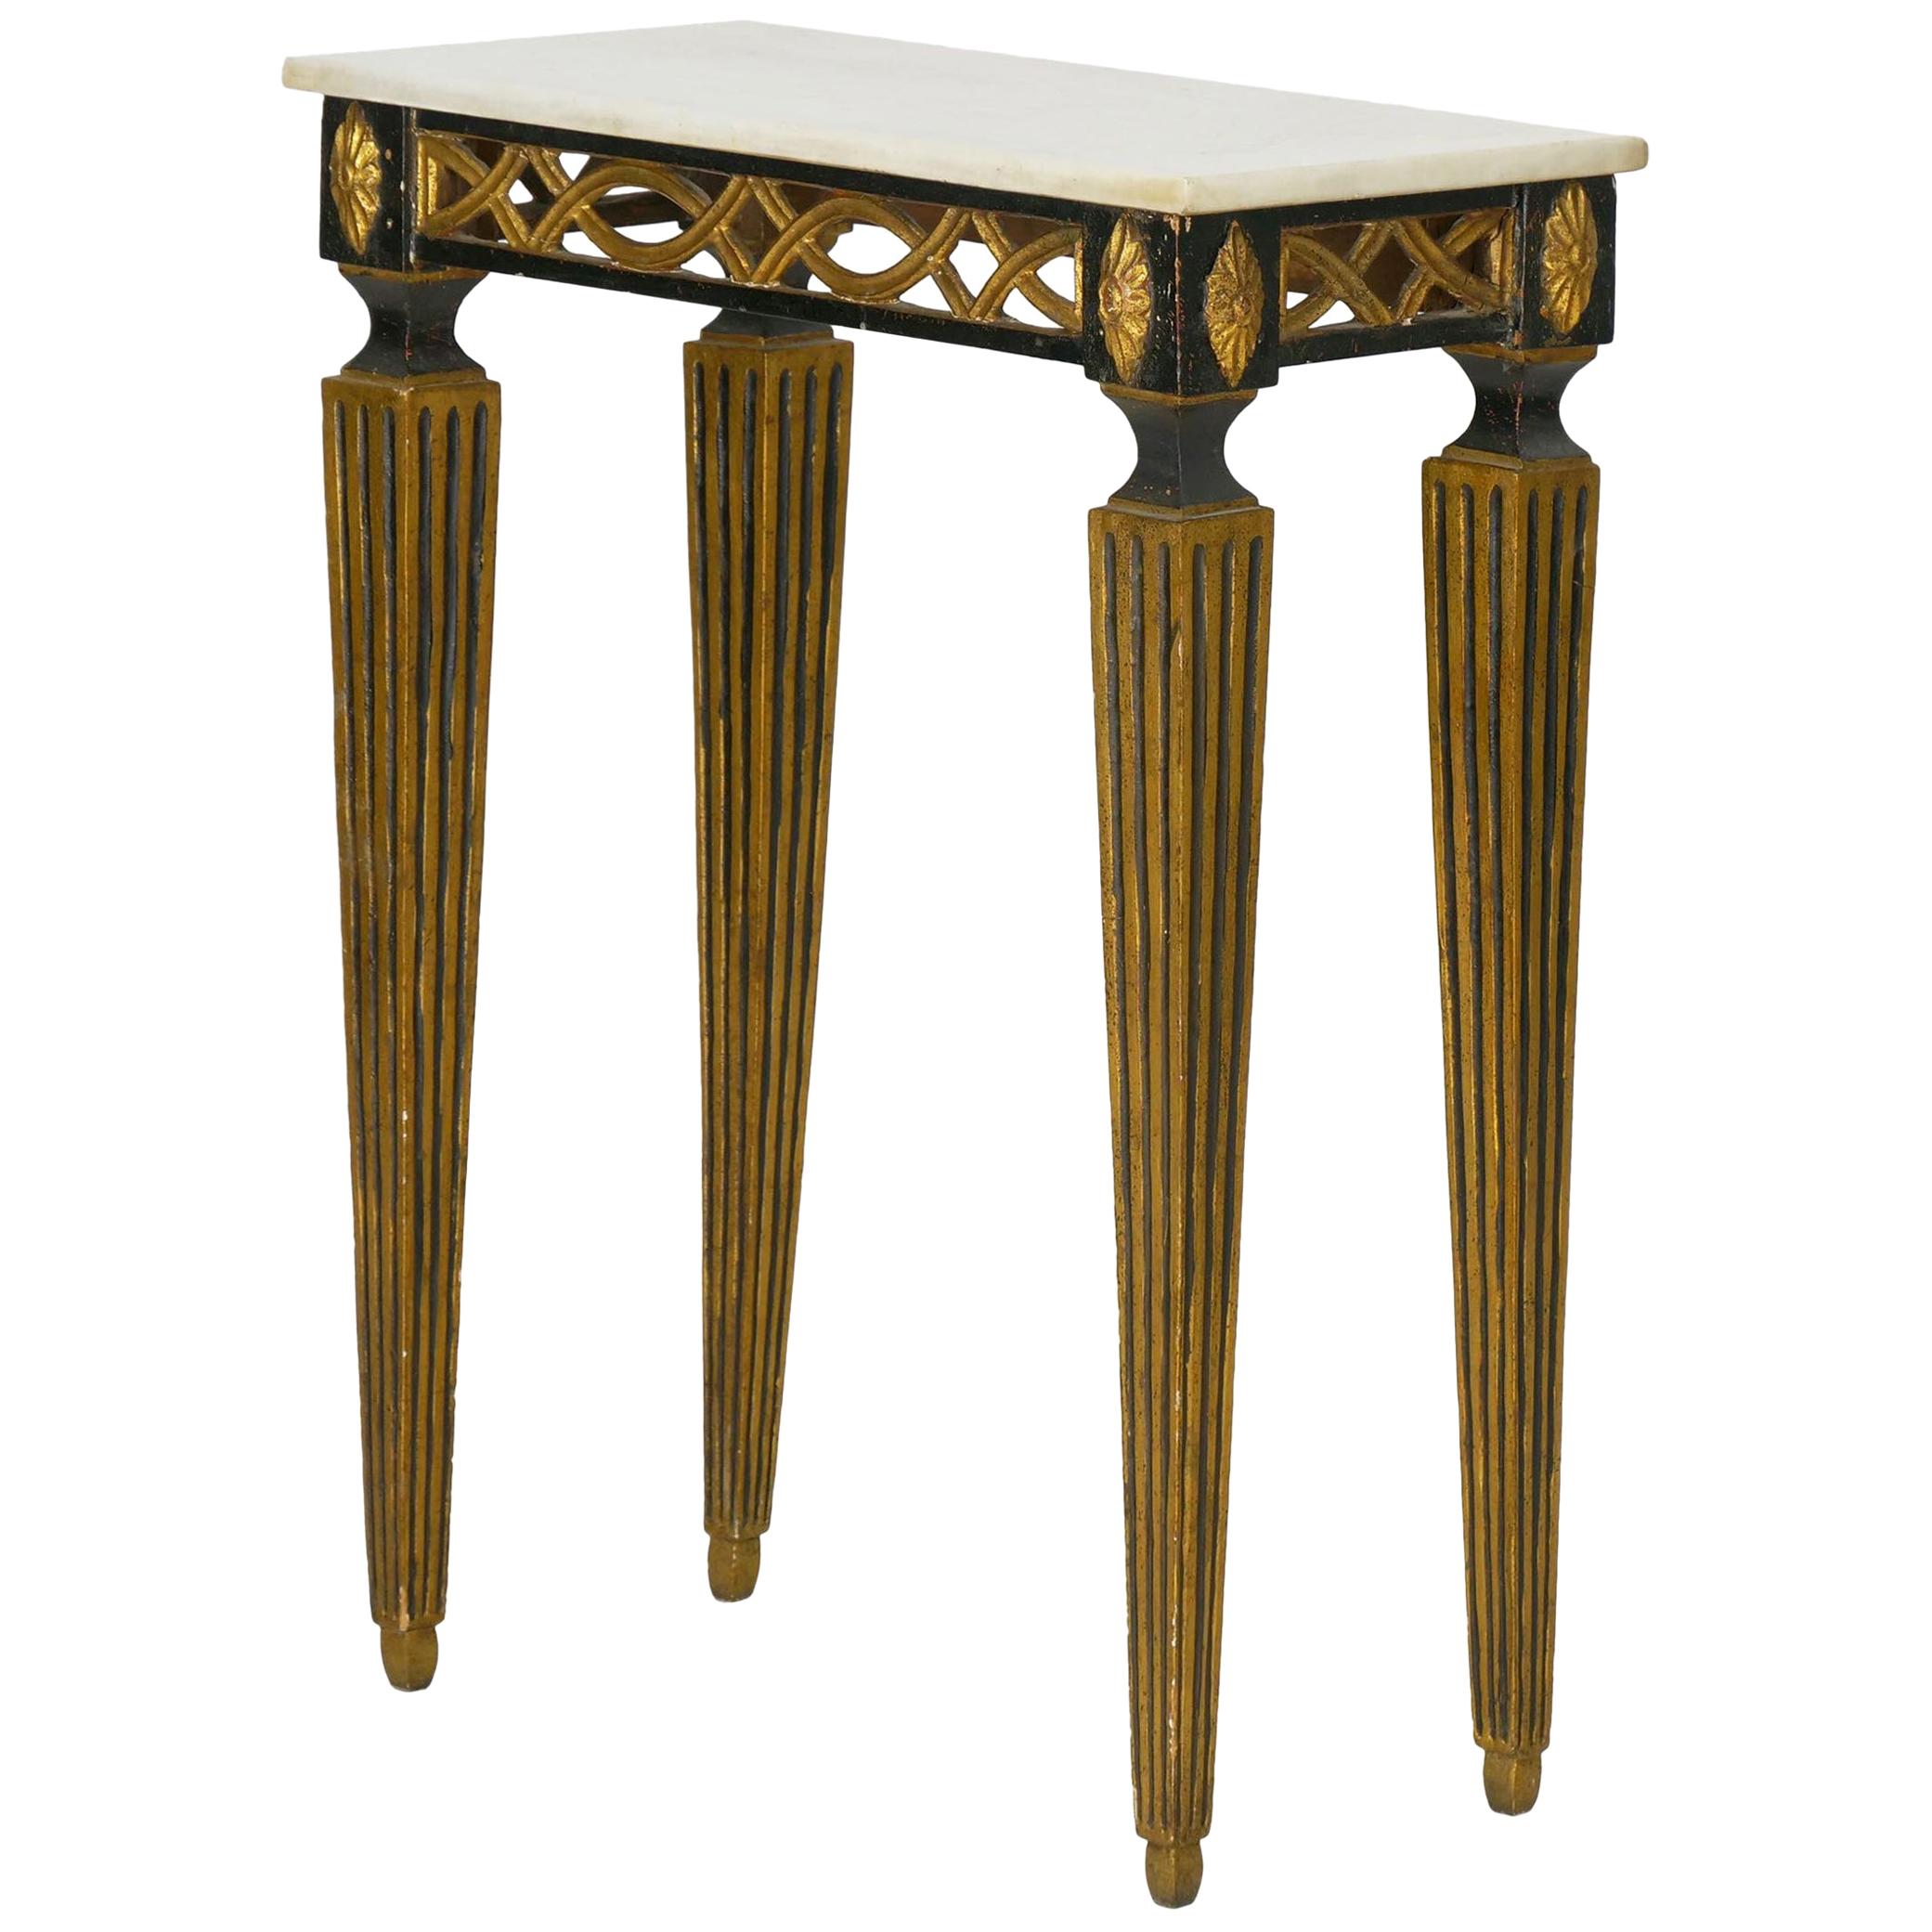 Italian Neoclassical Ebony Painted Marble-Top Console Table, 19th Century